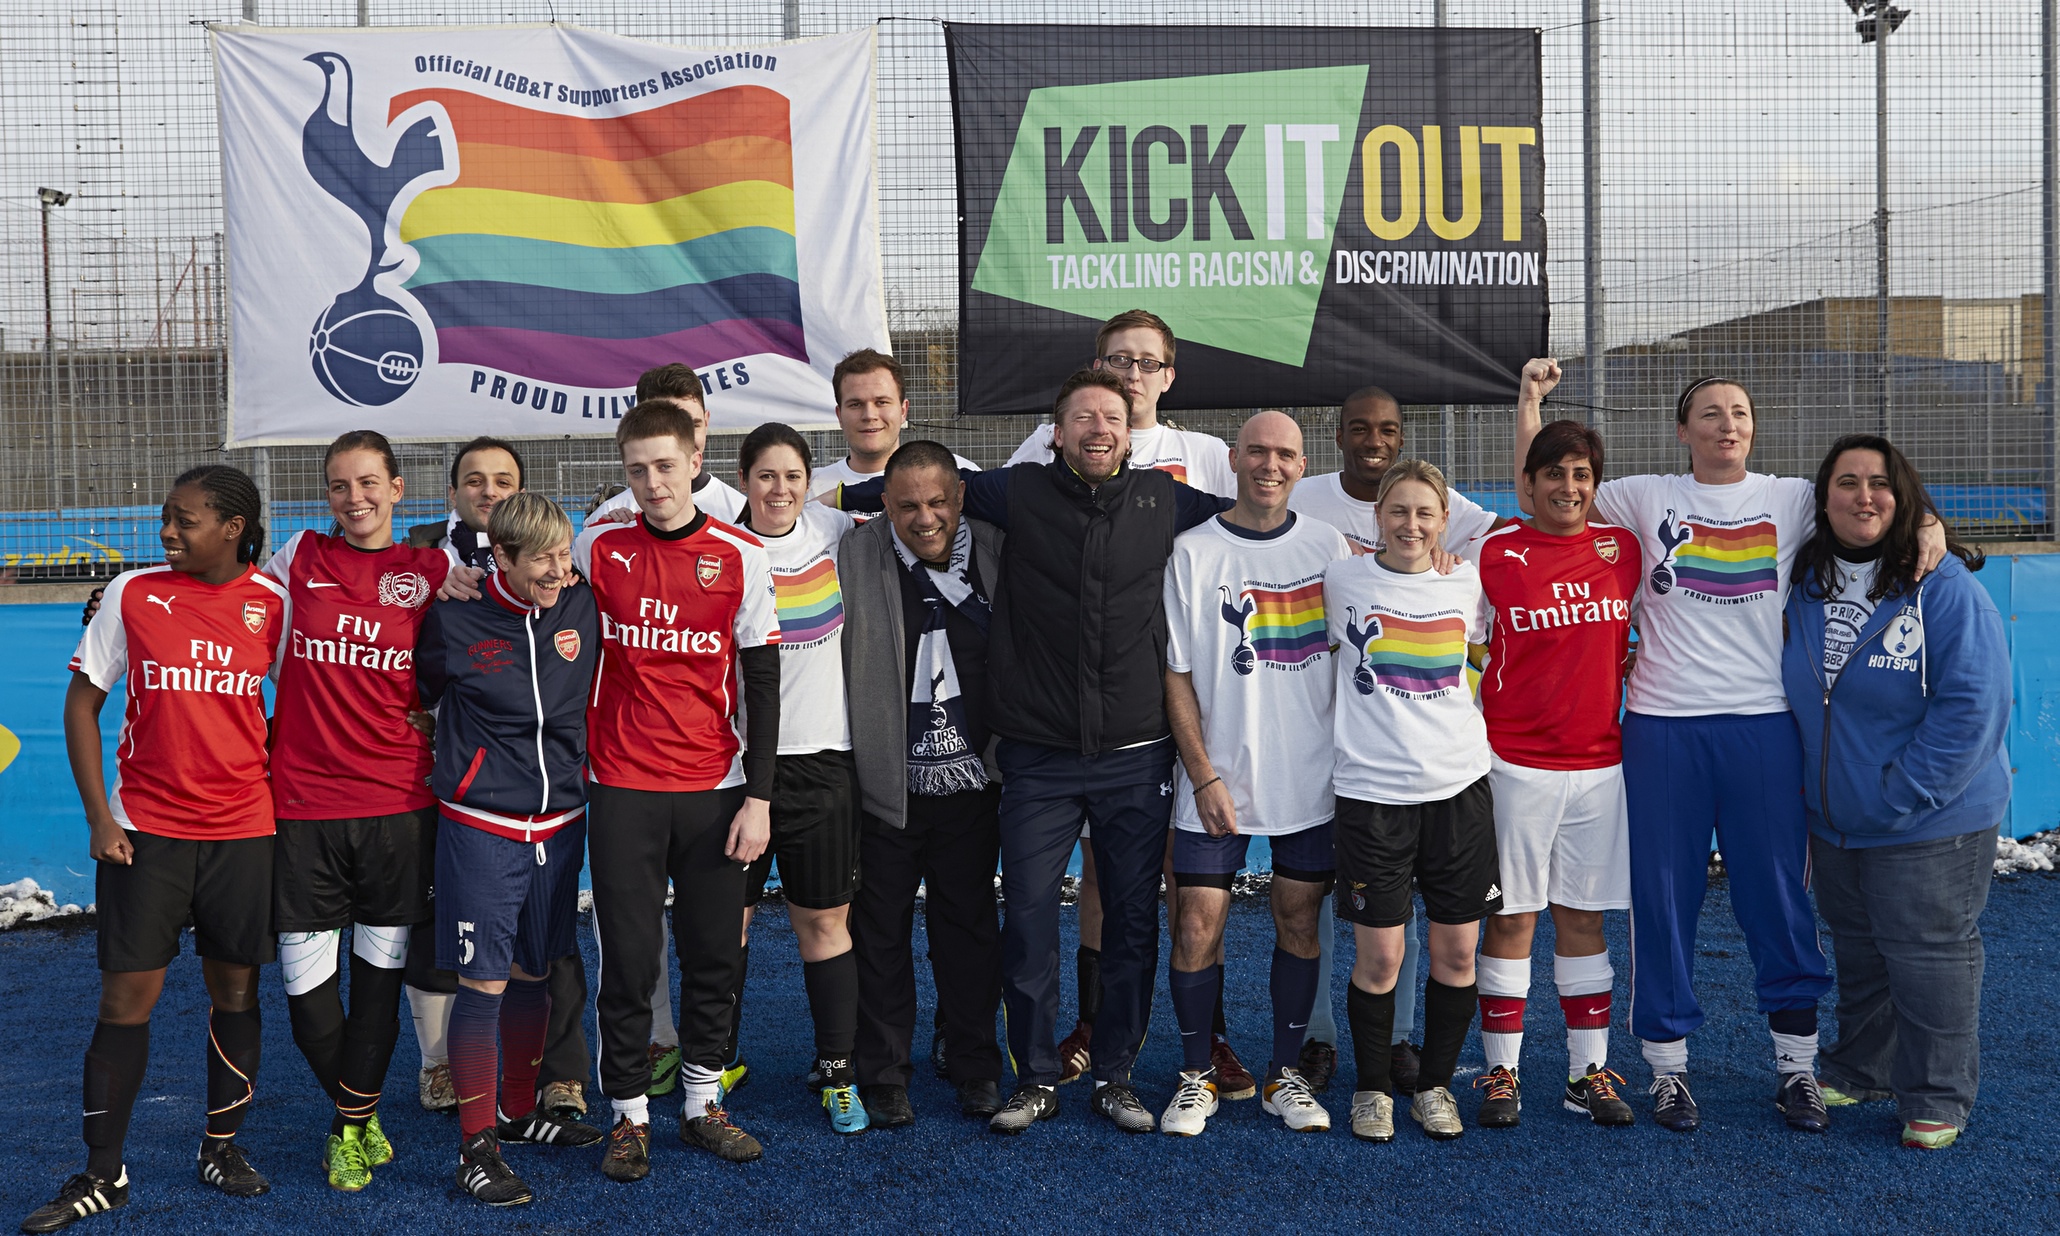 Proud Lilywhites And Gay Gooners Fly Rainbow Flag For Lgbt Football Fans Football The Guardian